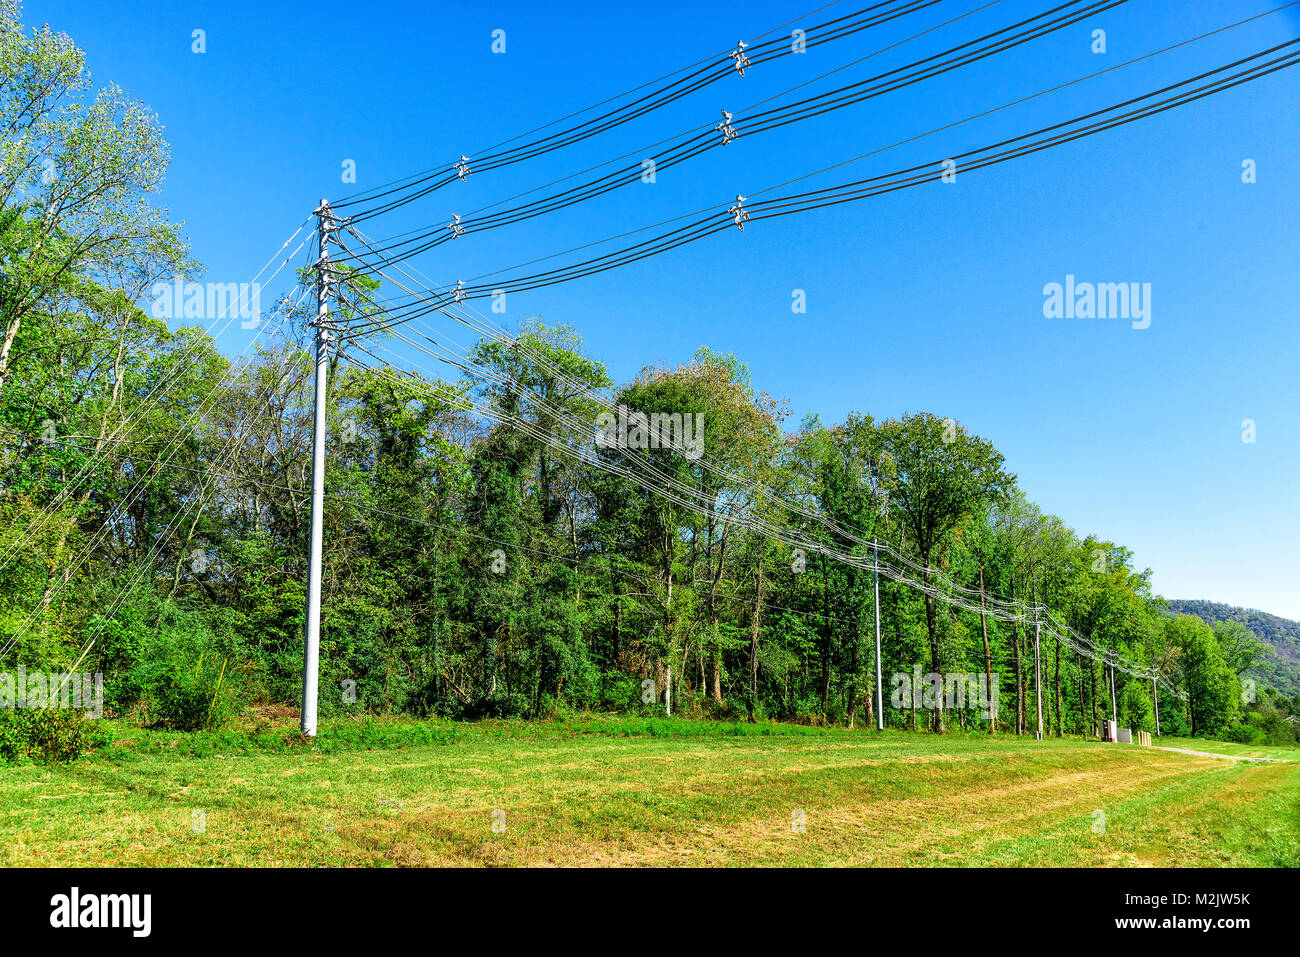 Horizontal shot of  high voltage power lines next to some green trees. Stock Photo